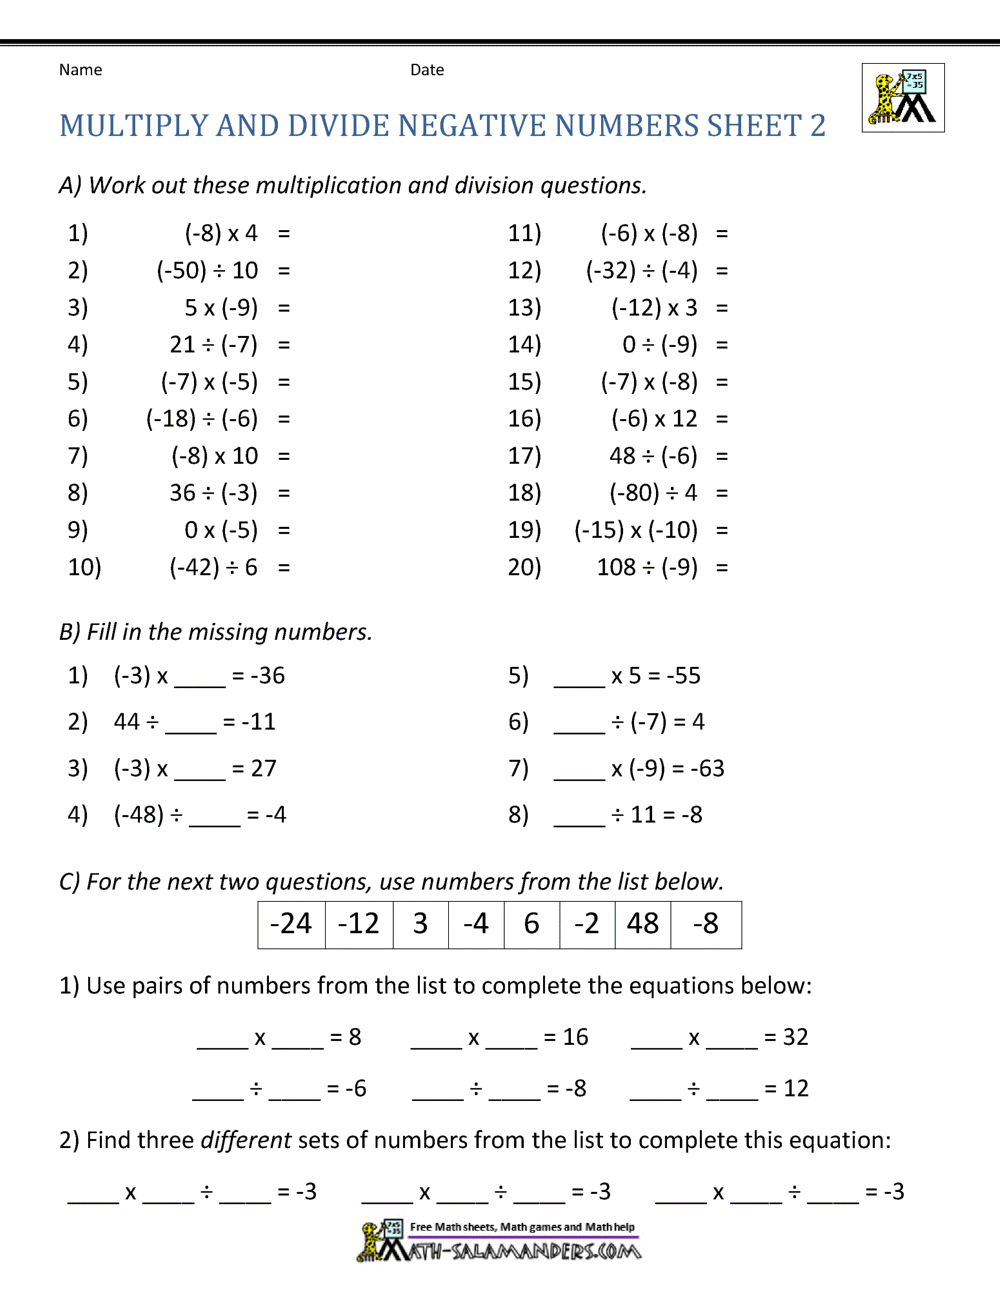 Multiply and Divide Negative Numbers In Multiplication Of Integers Worksheet